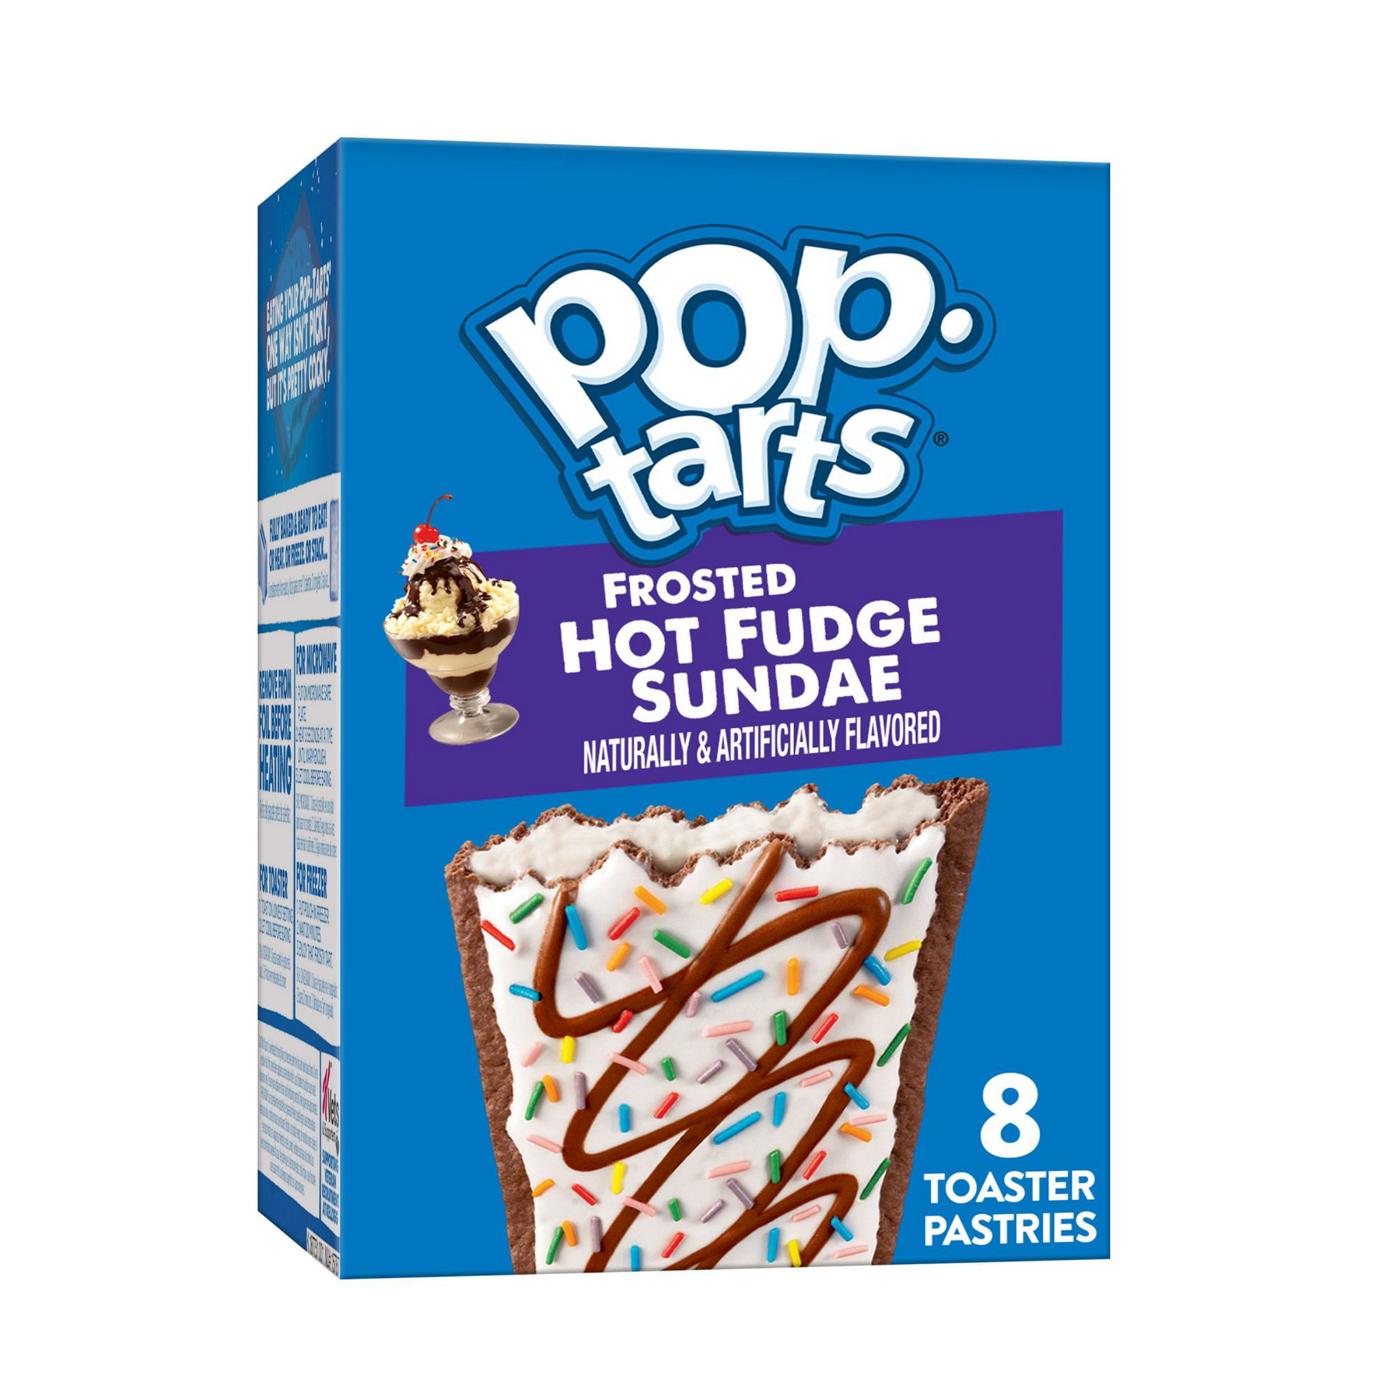 Pop-Tarts Frosted Hot Fudge Sundae Toaster Pastries; image 1 of 7